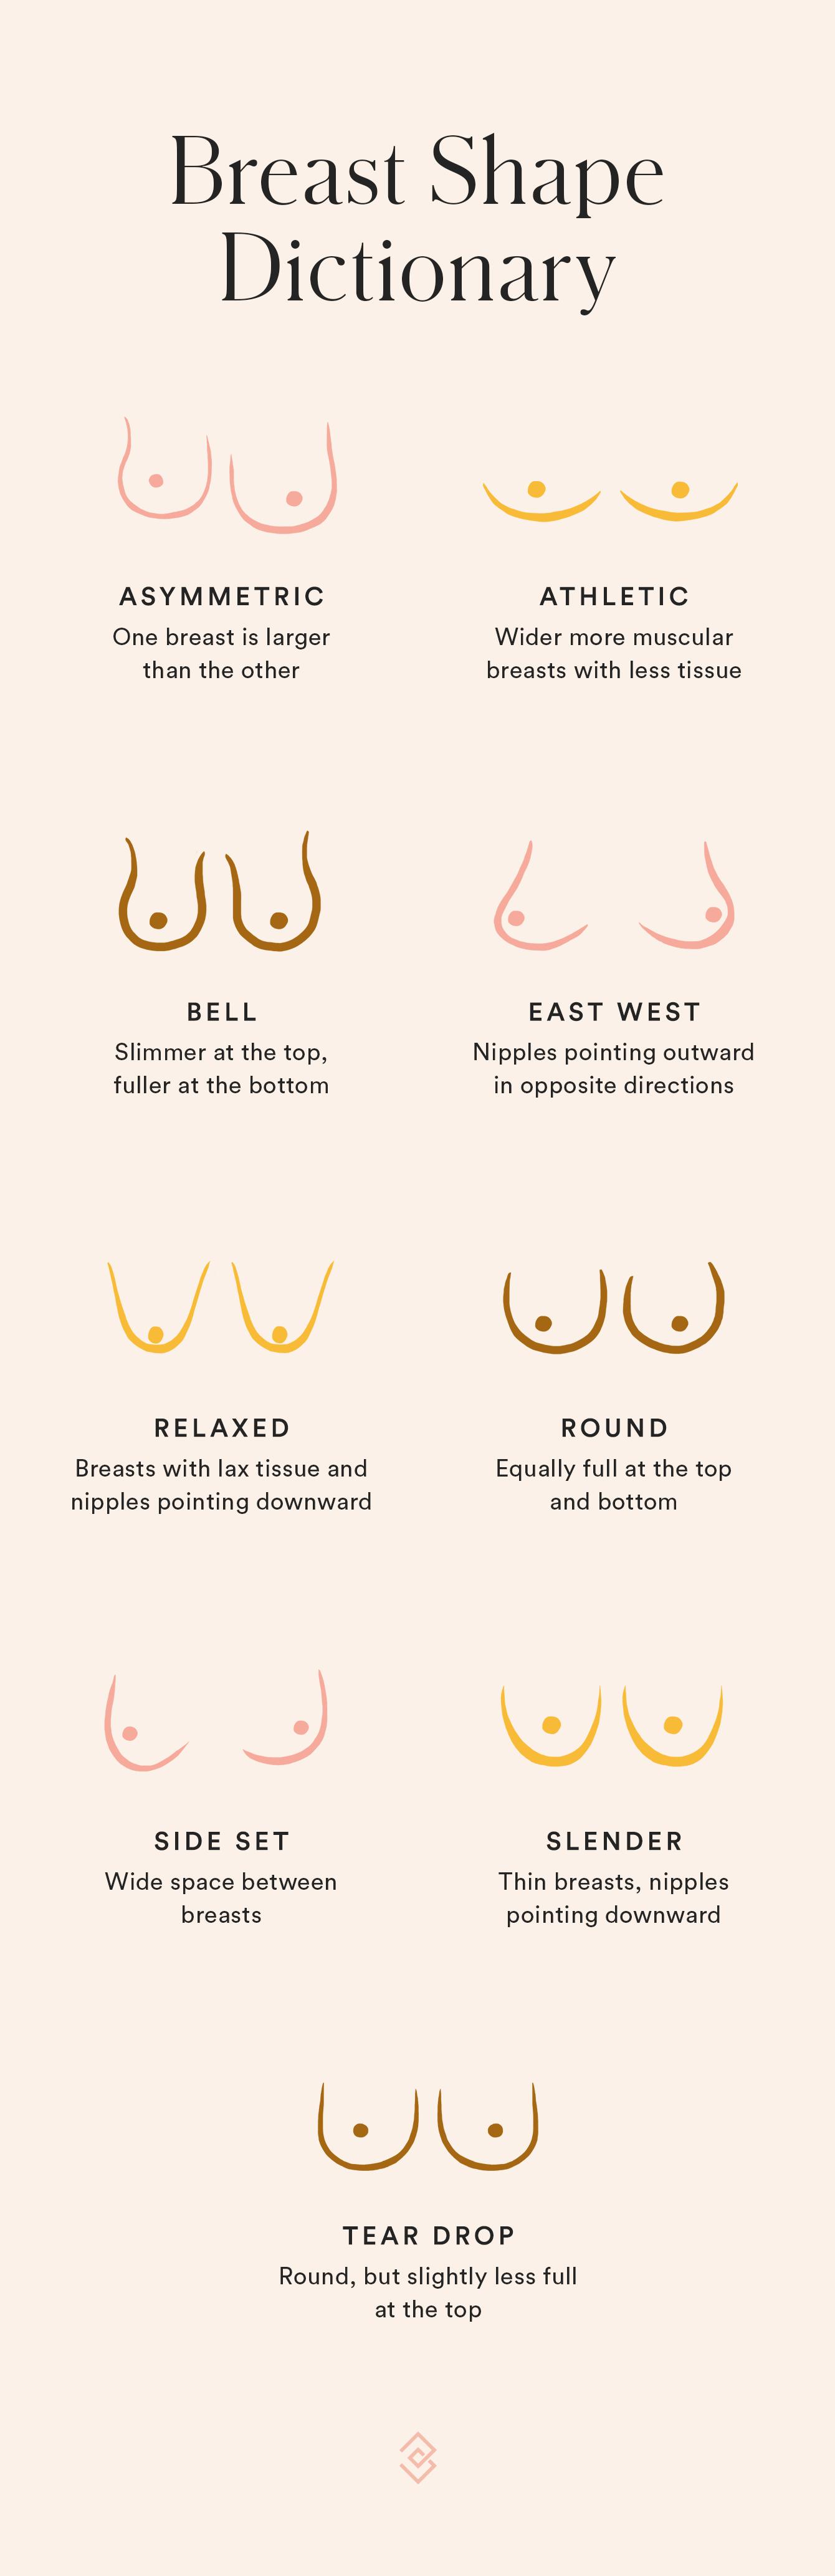 there are 9 main breast shapes: asymmetric, athletic, bell shaped, relaxed, east west, round, side set, slender, and tear drop